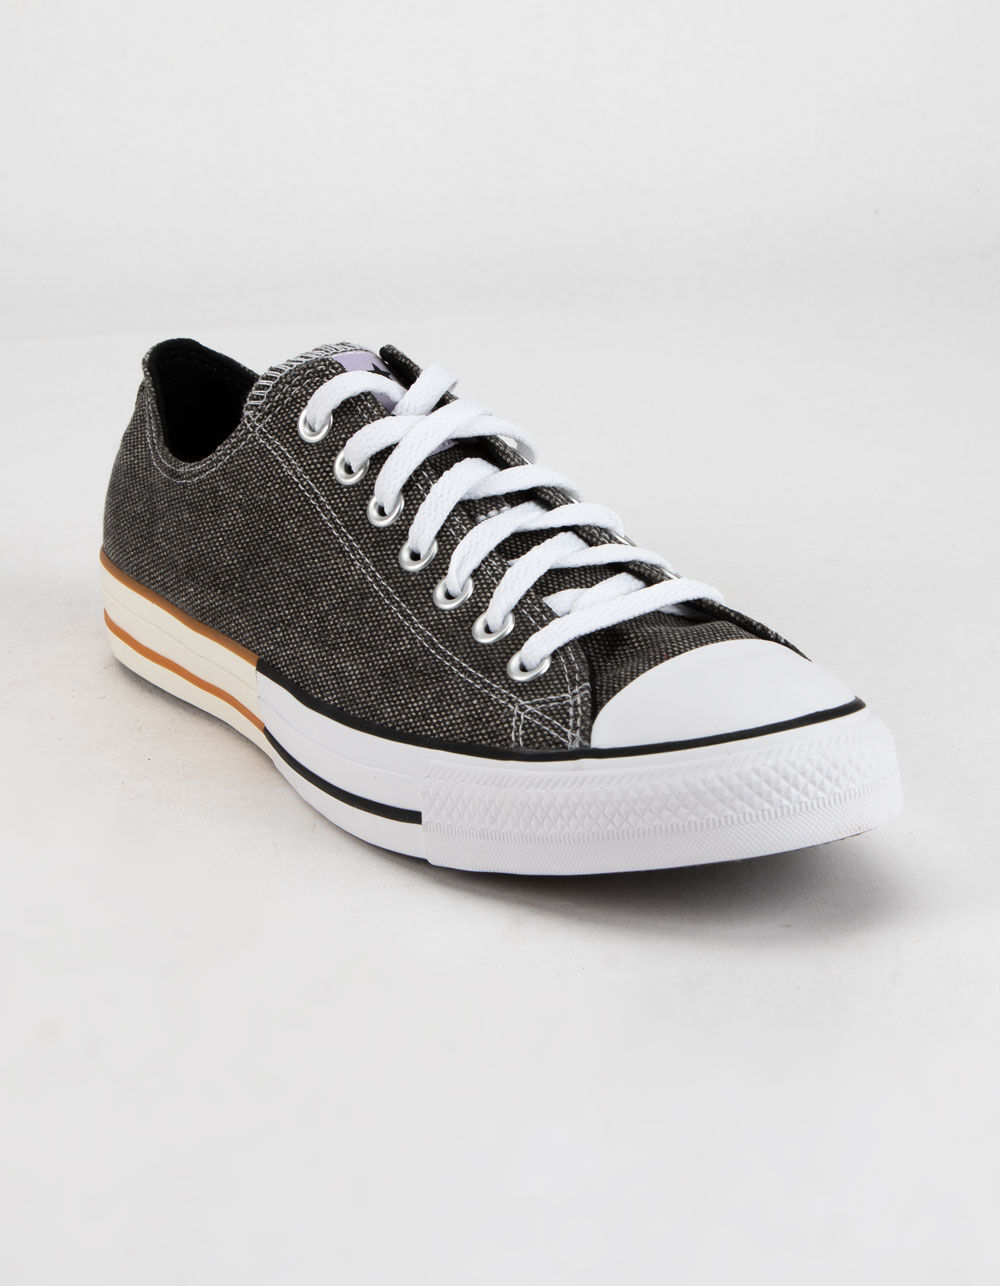 CONVERSE Chuck Taylor All Star Happy Camper Patch Low Top Shoes - GRAY ...